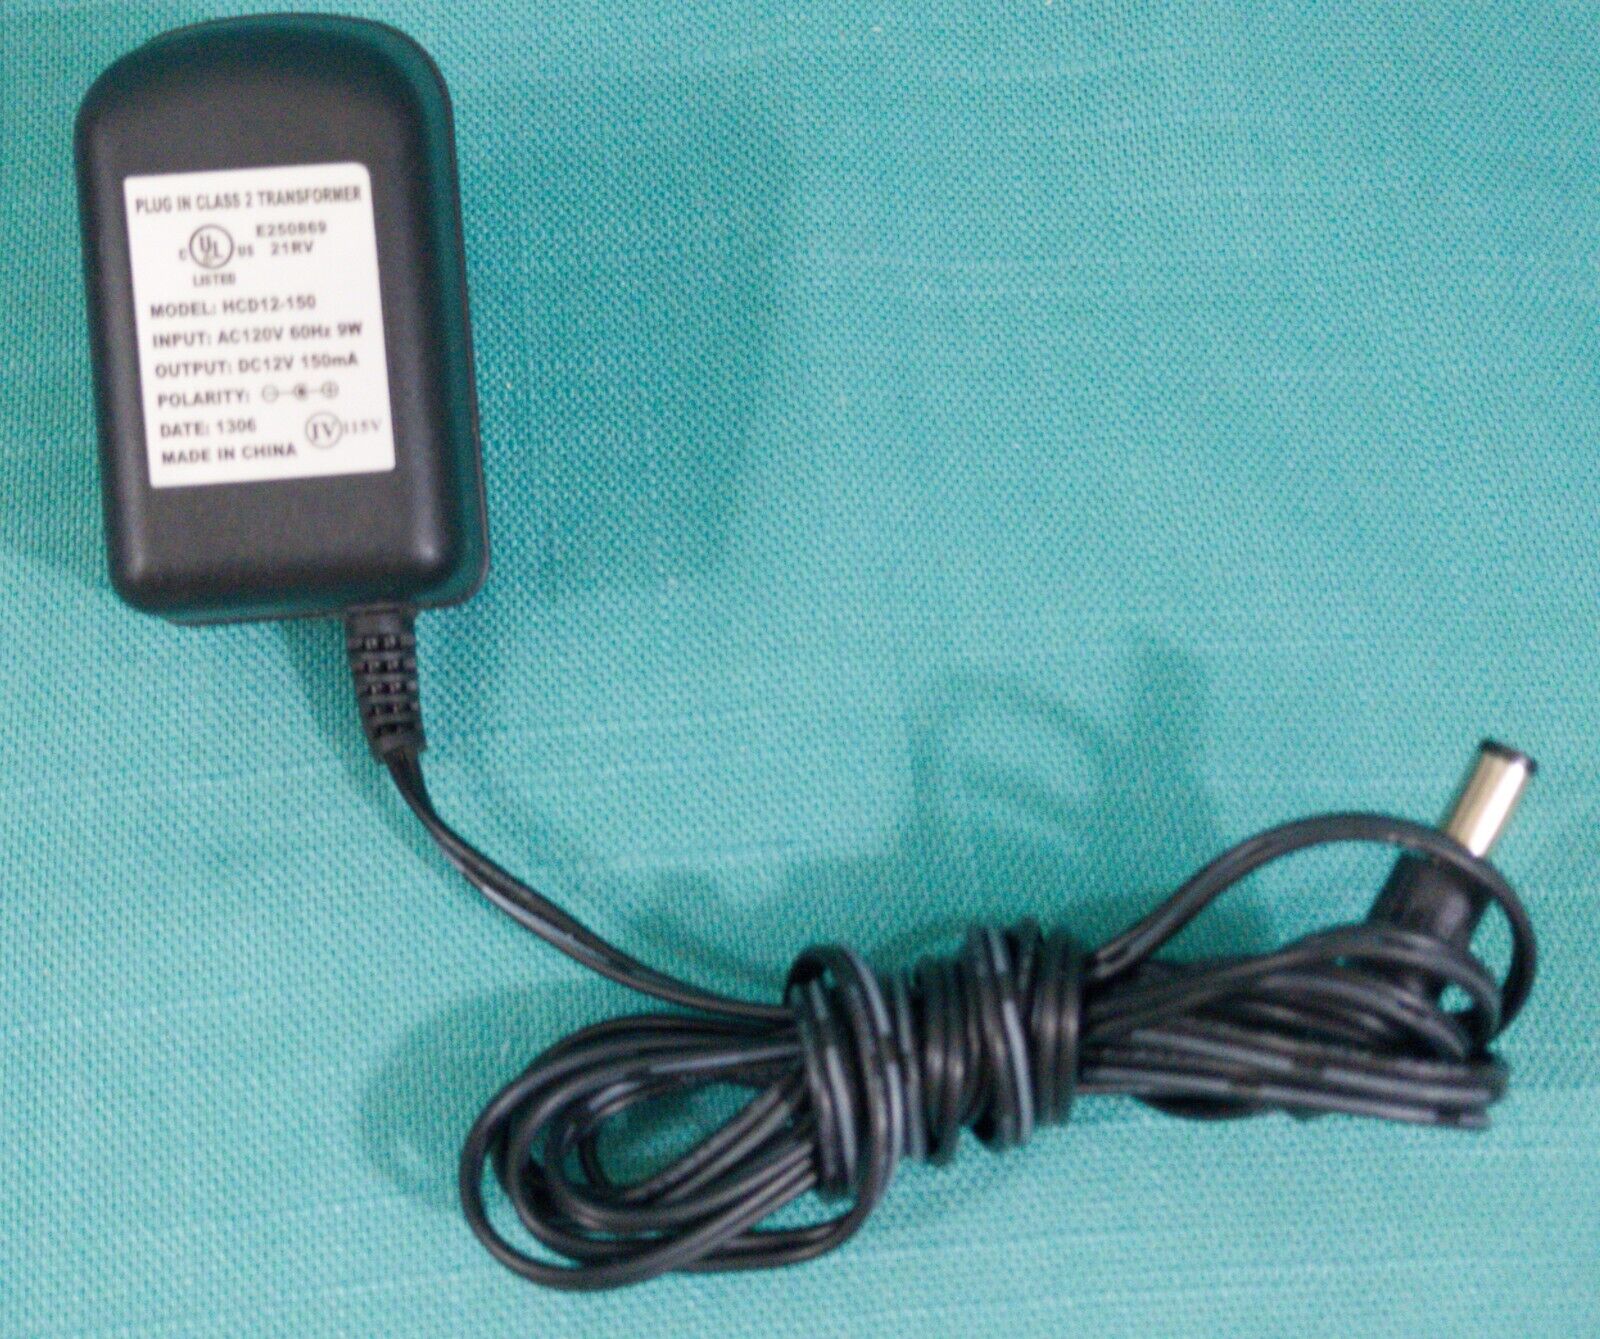 *Brand NEW* DC24V 1200mA AC Adaptor Model HCD12-150 Plug in Class 2 TESTED Working Good POWER Supply